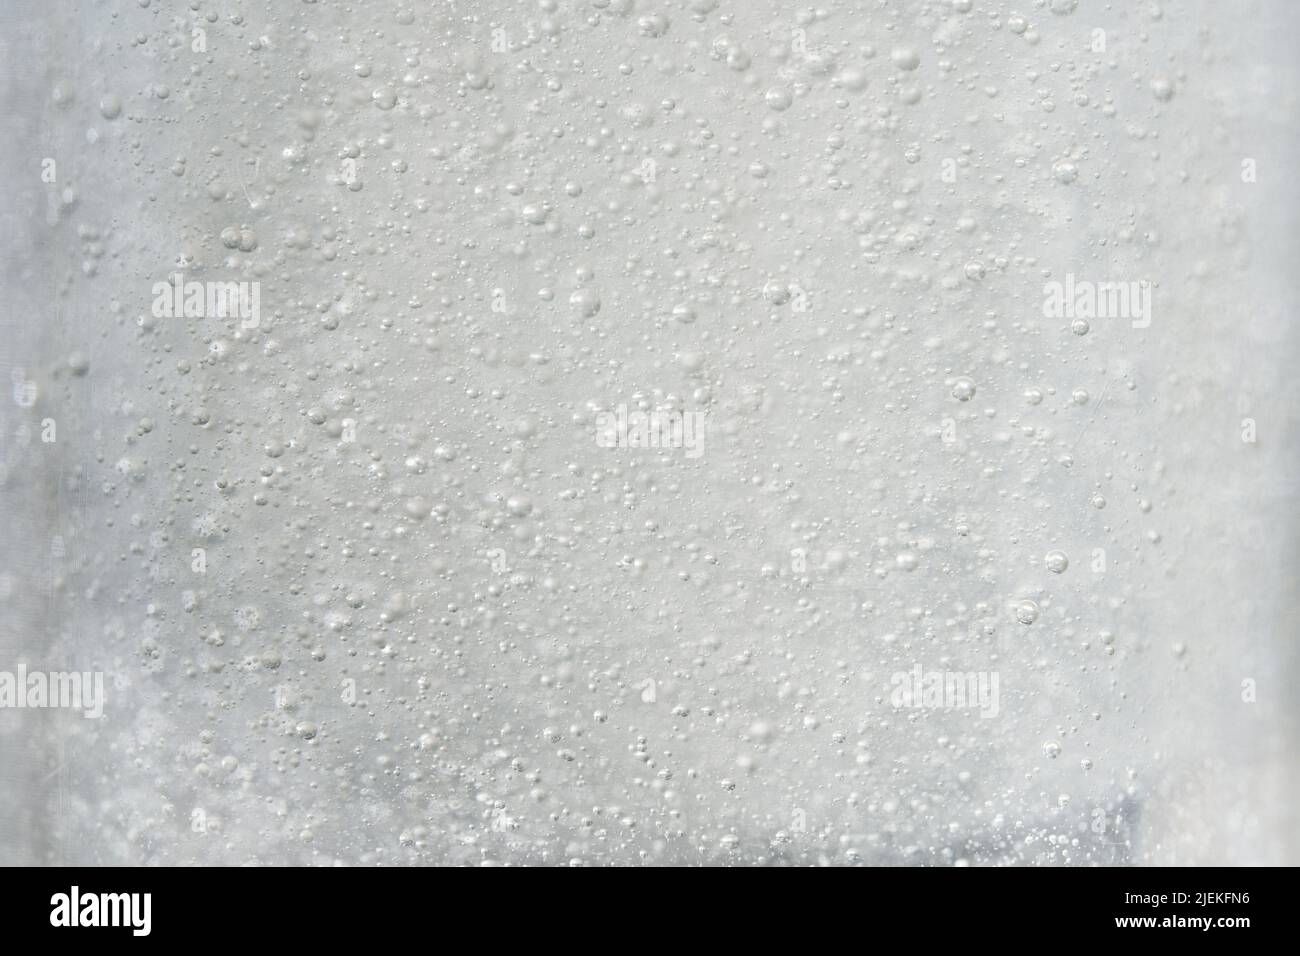 Bubbles in liquid gel on light grey background. Authentic makeup texture Stock Photo